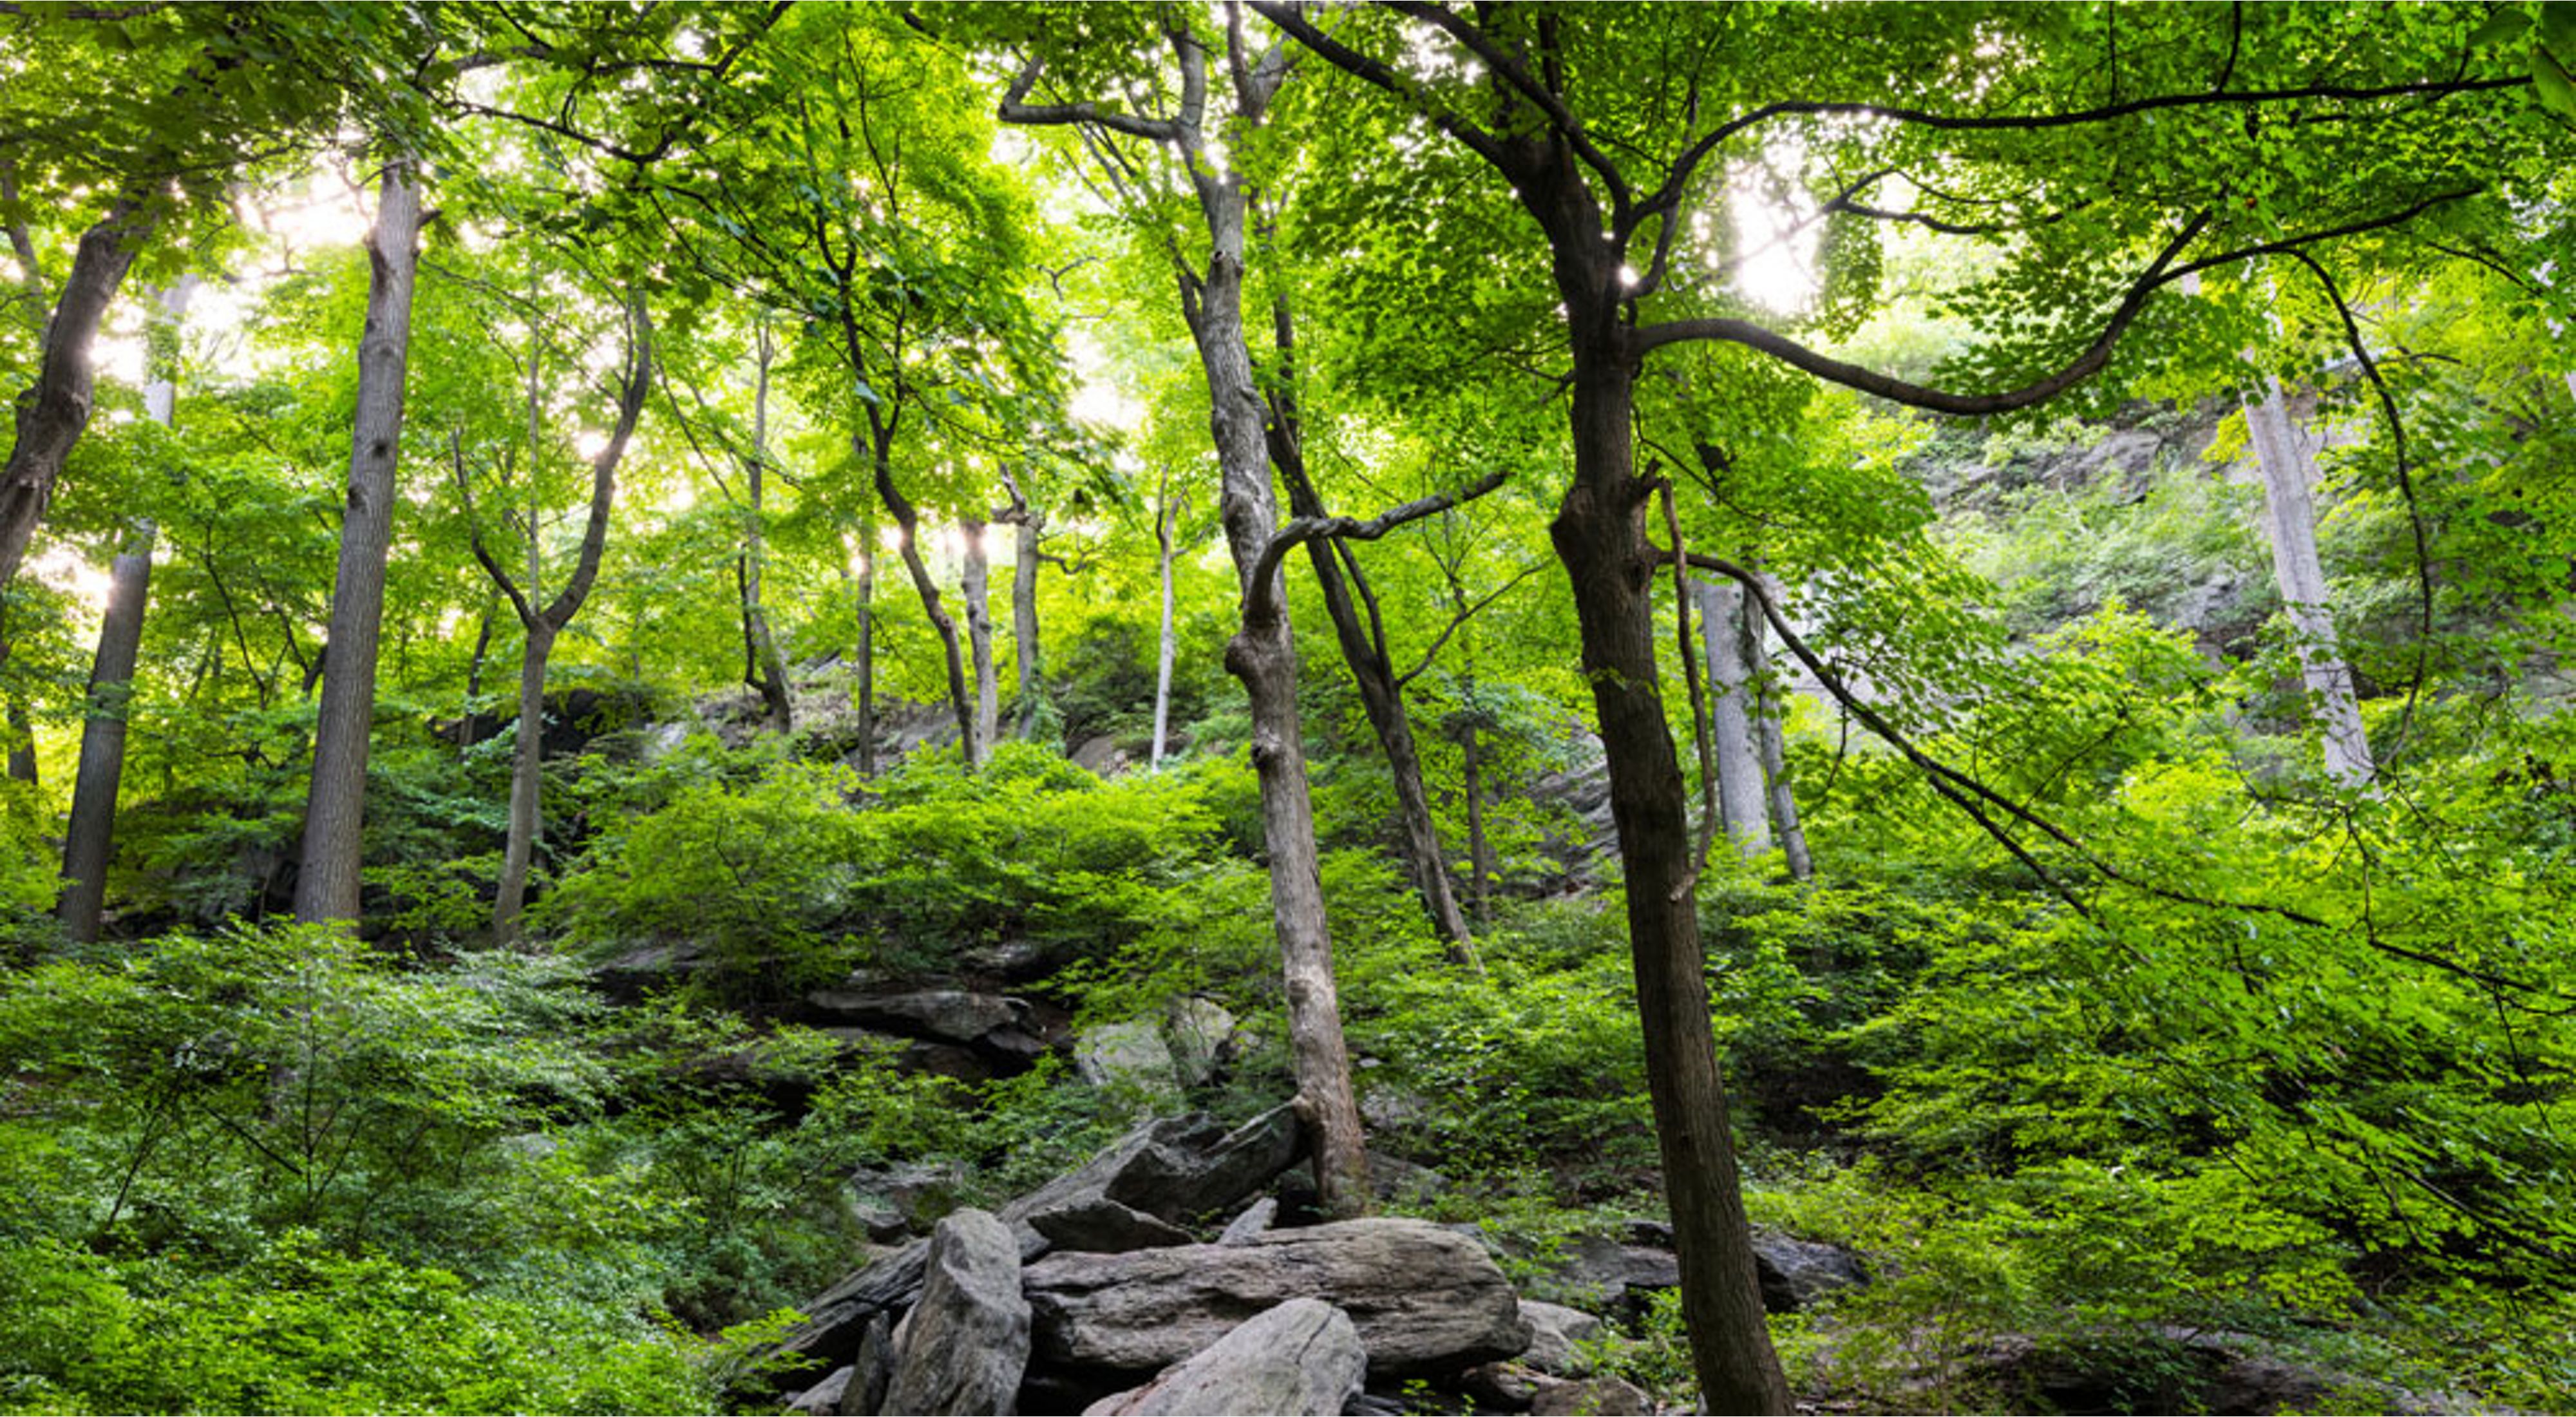 A forested landscape with green shrubs and boulders lining roughly 20 trees in view.